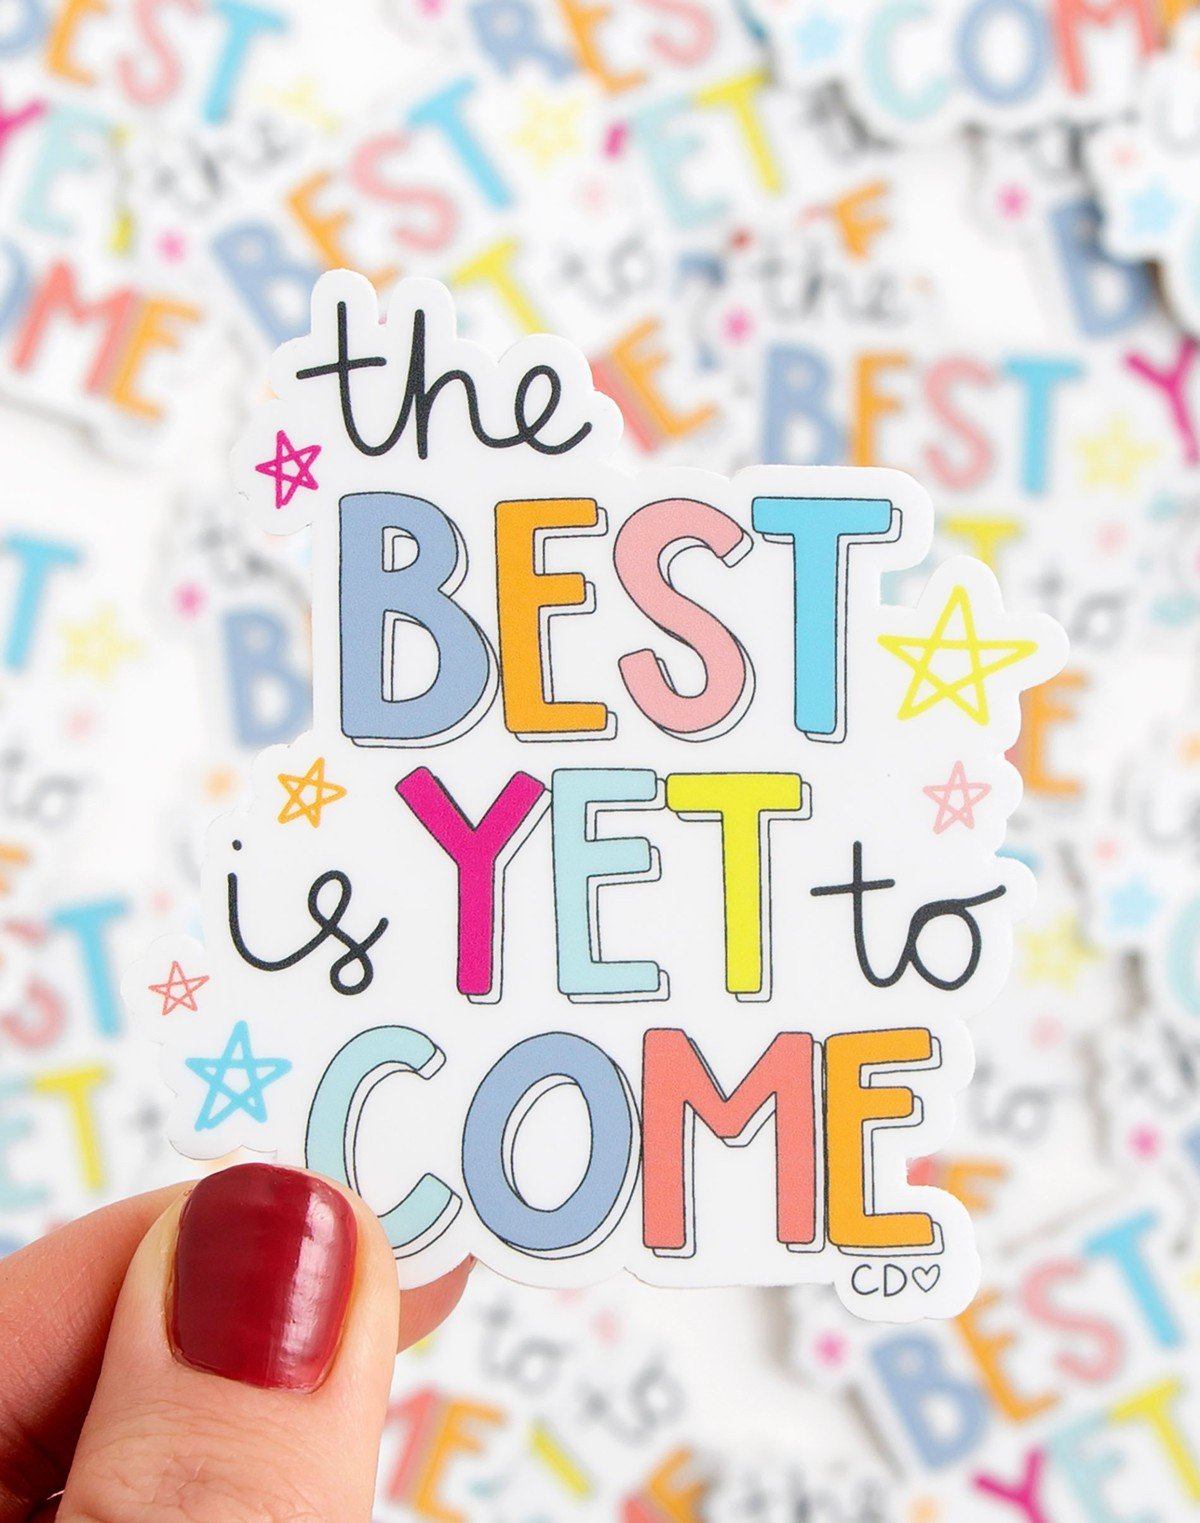 The Best is Yet to Come Decal Sticker item